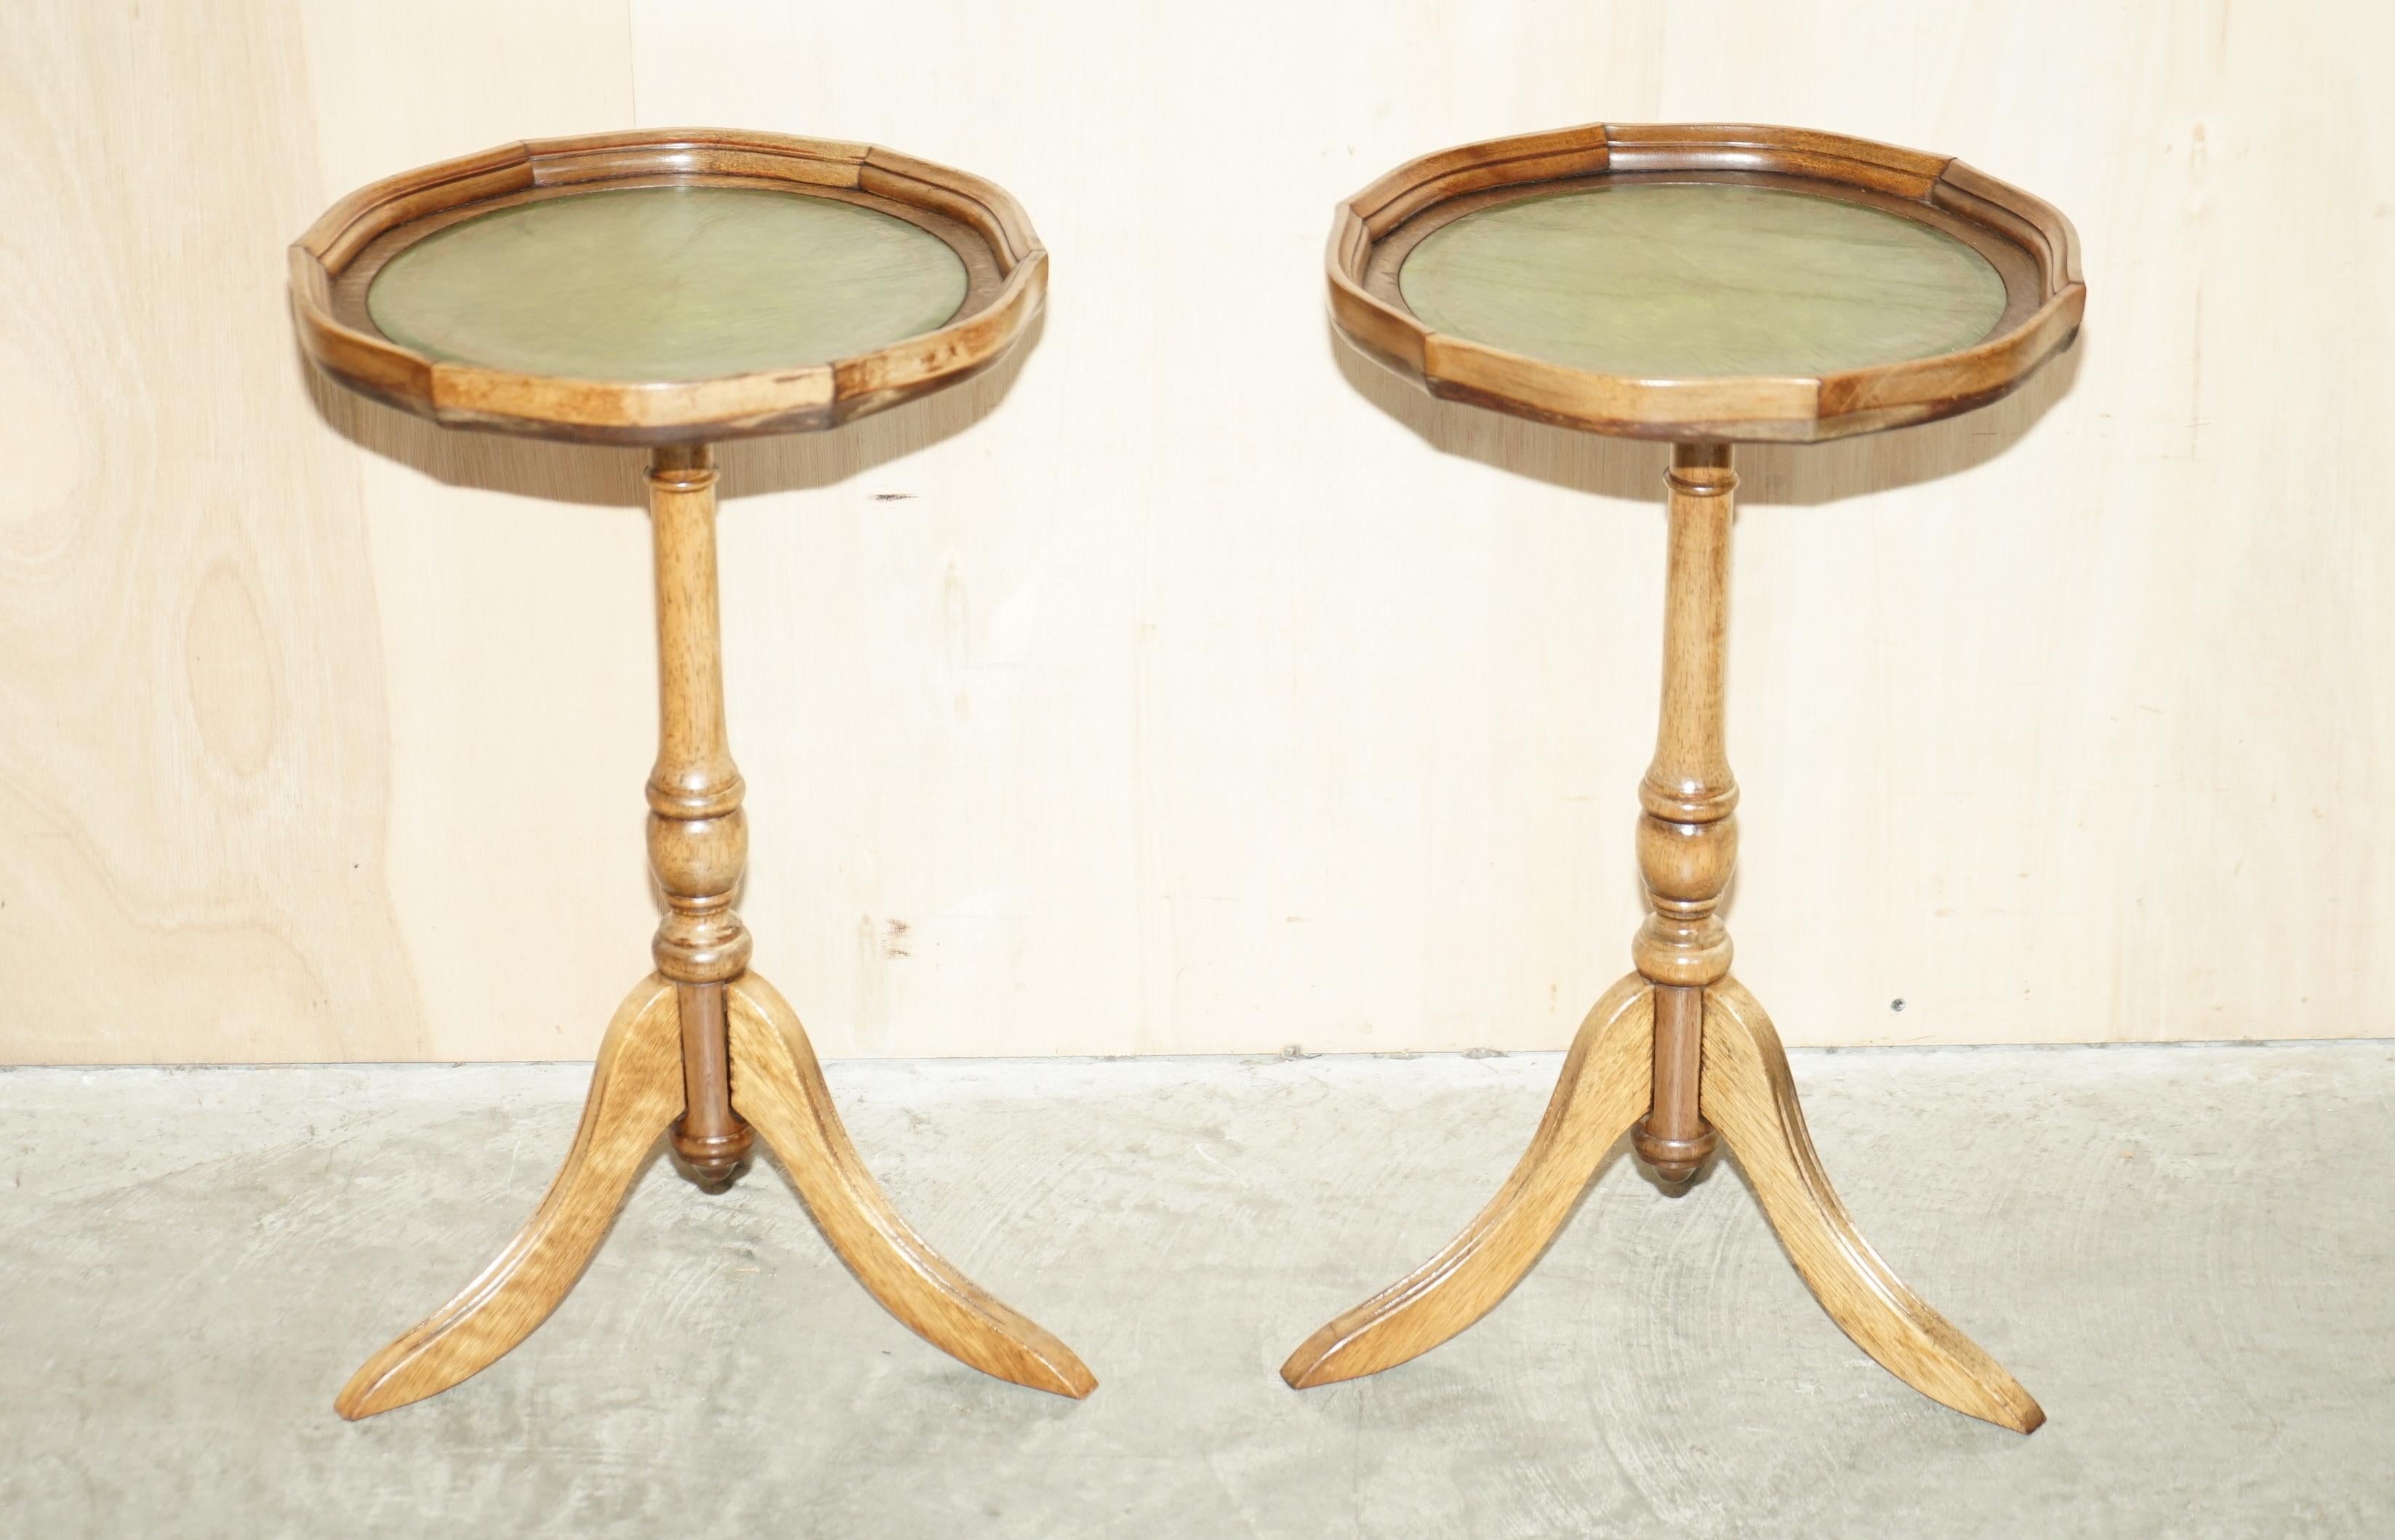 We are delighted to offer for sale this lovely pair of Bevan Funnell vintage light Mahogany with green leather top lamp or side tables,

A good-looking, well-made pair of tripod tables in lovely order, we have cleaned waxed and polished them from